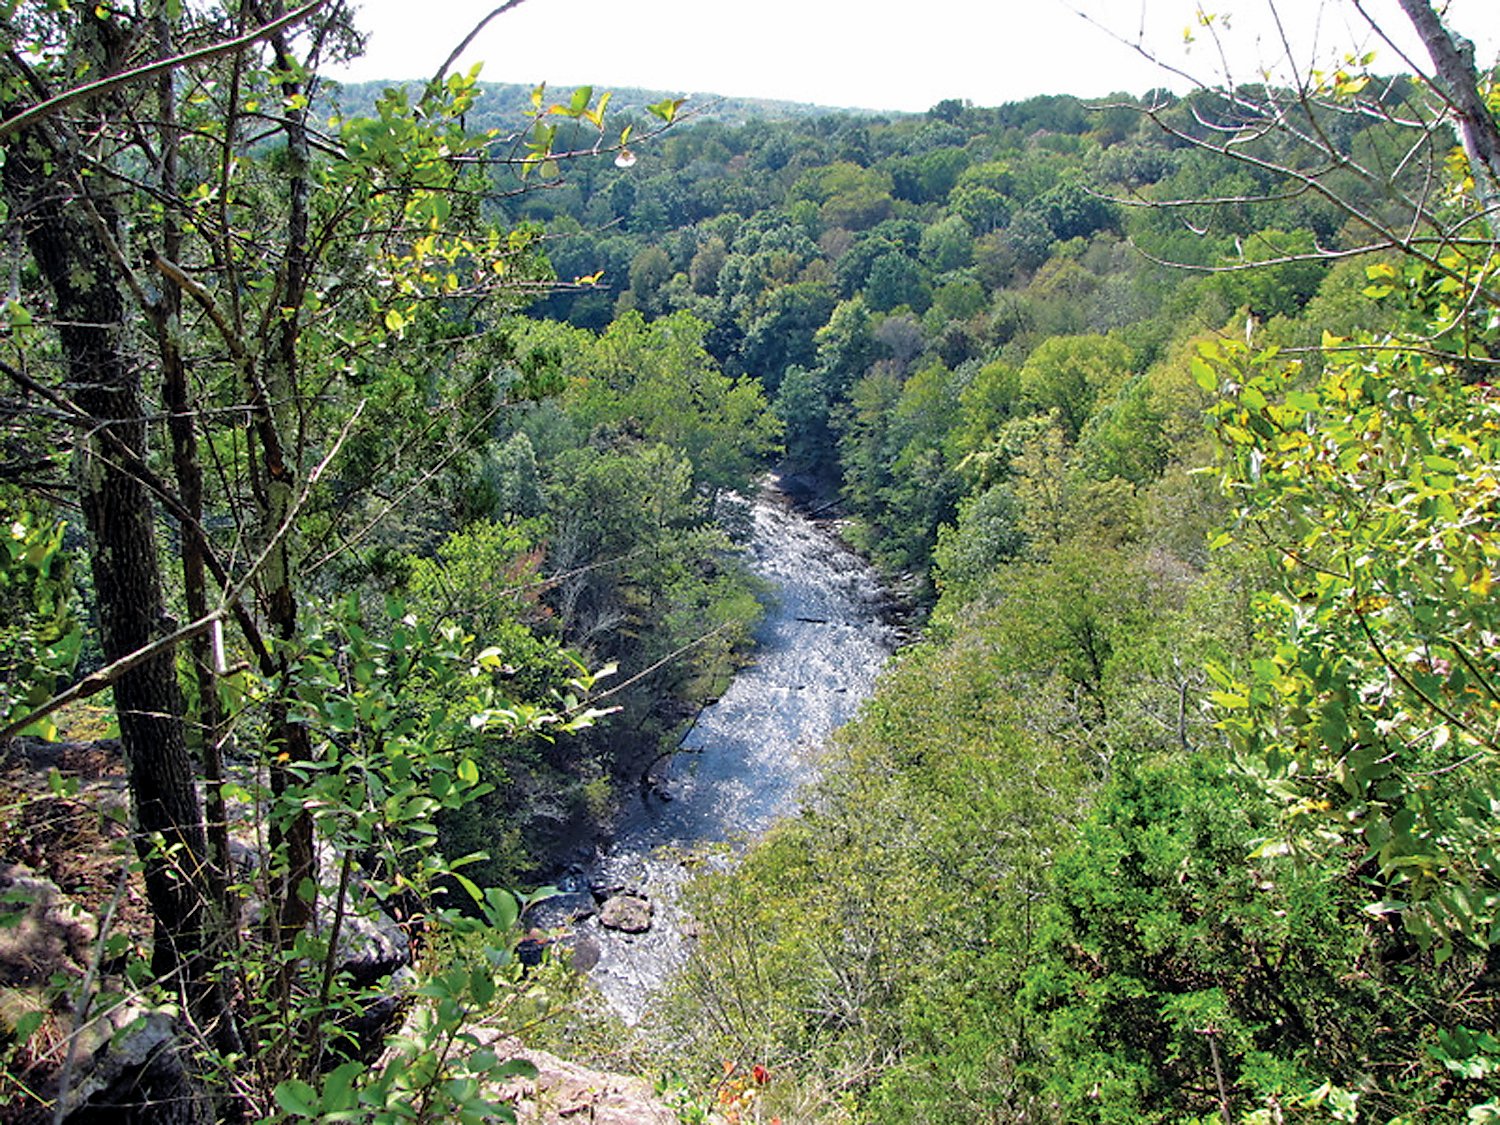 Tohickon Creek is the pathway for whitewater releases from Lake Nockamixon twice a year. It’s been suggested that more frequent releases would enhance the quality of the creek.